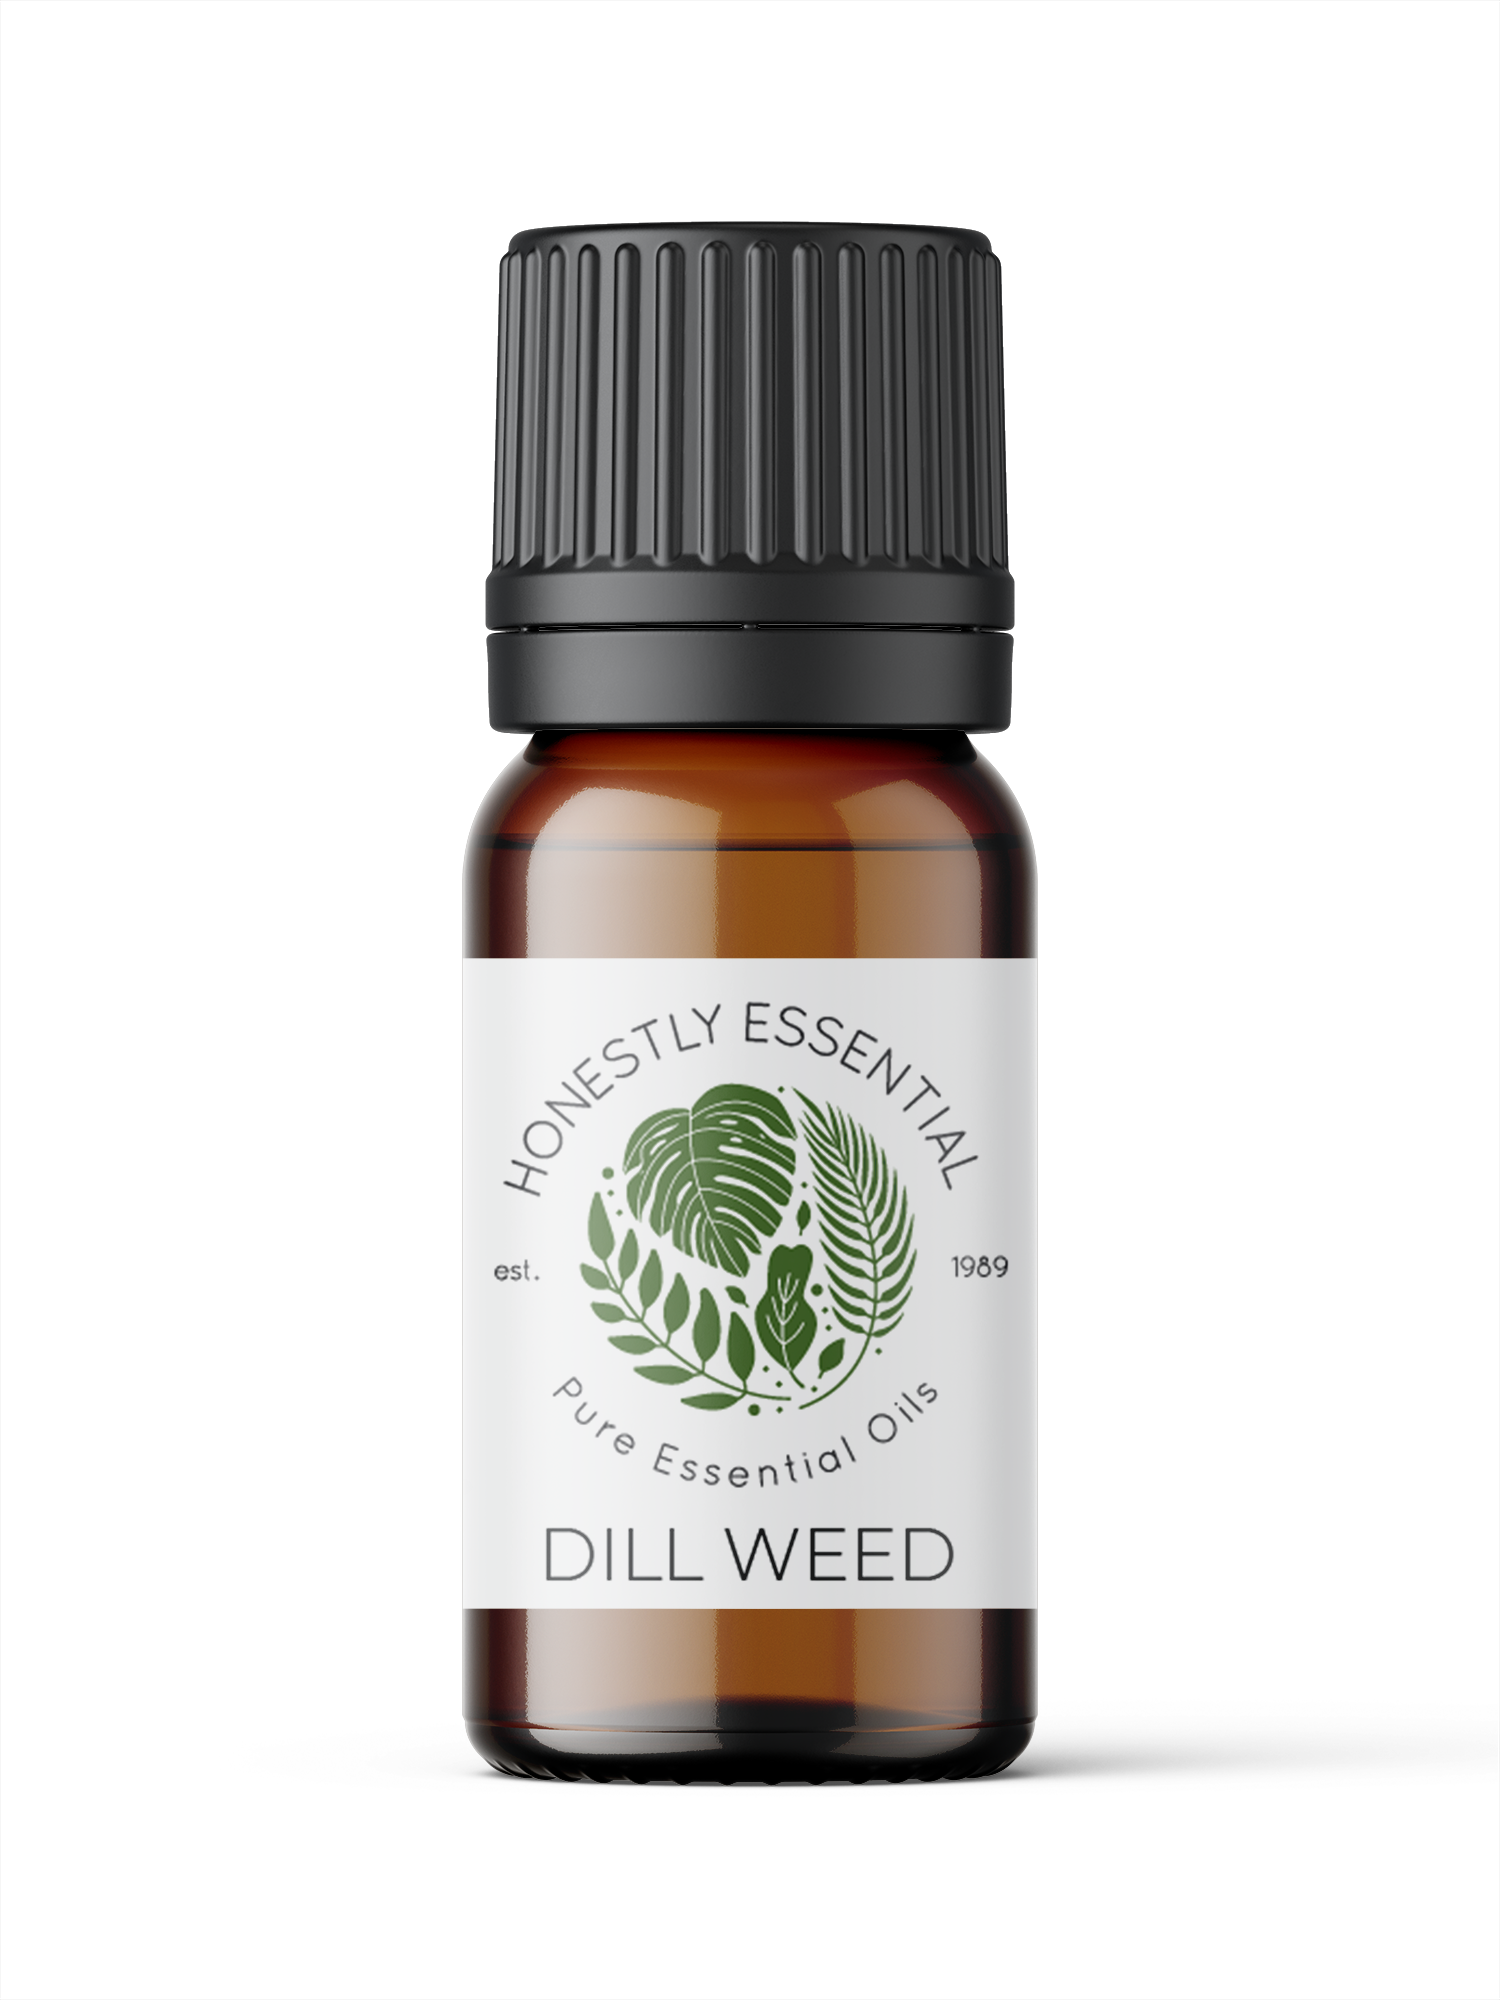 Dillweed Essential Oil - Essential Oils | Honestly Essential Oils anxiety, depression, digestion, energy